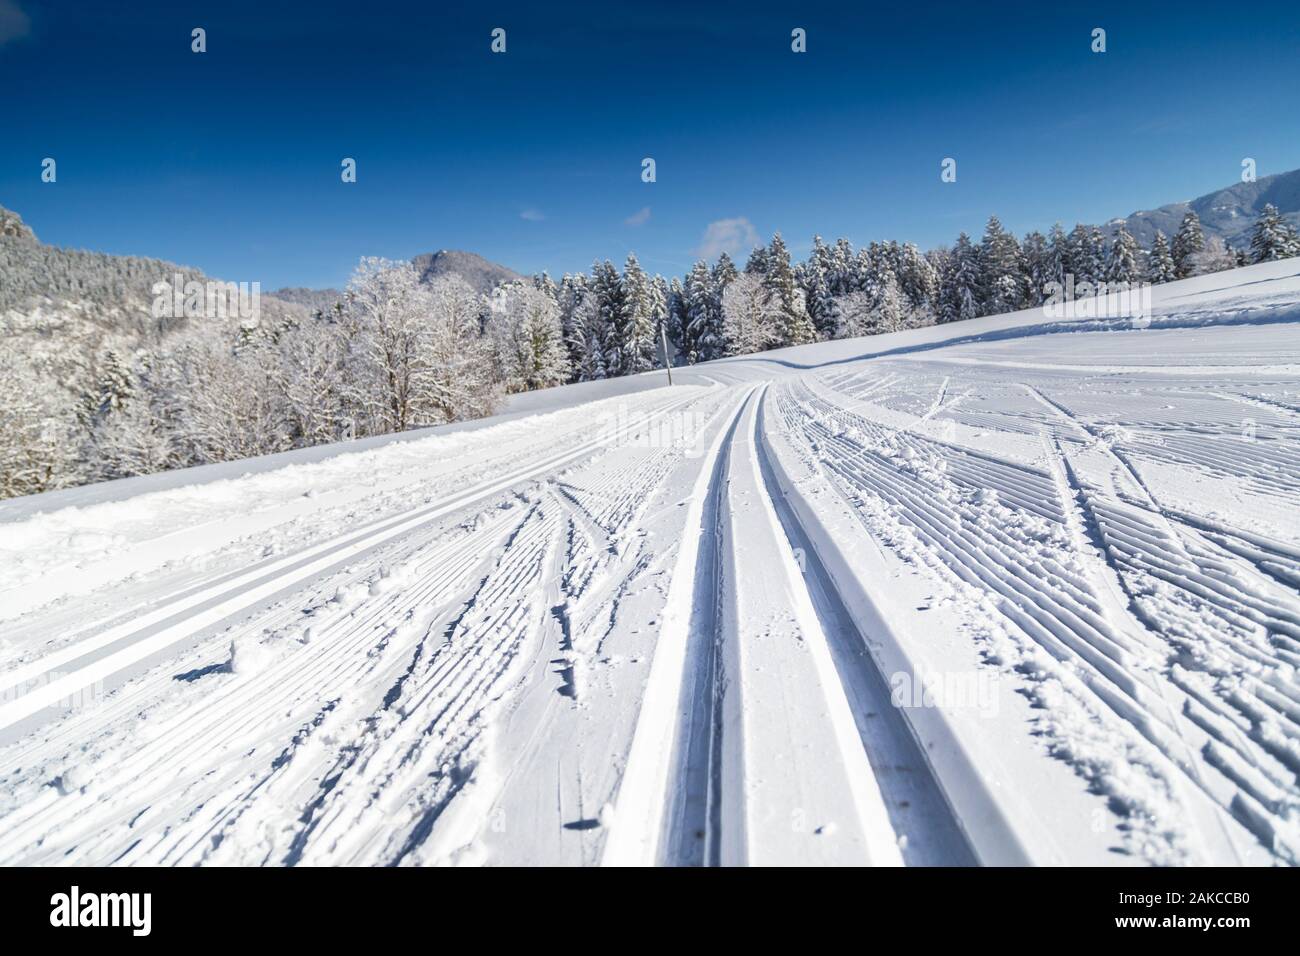 Close-up view of empty cross-country skiing track in beautiful winter wonderland scenery Stock Photo